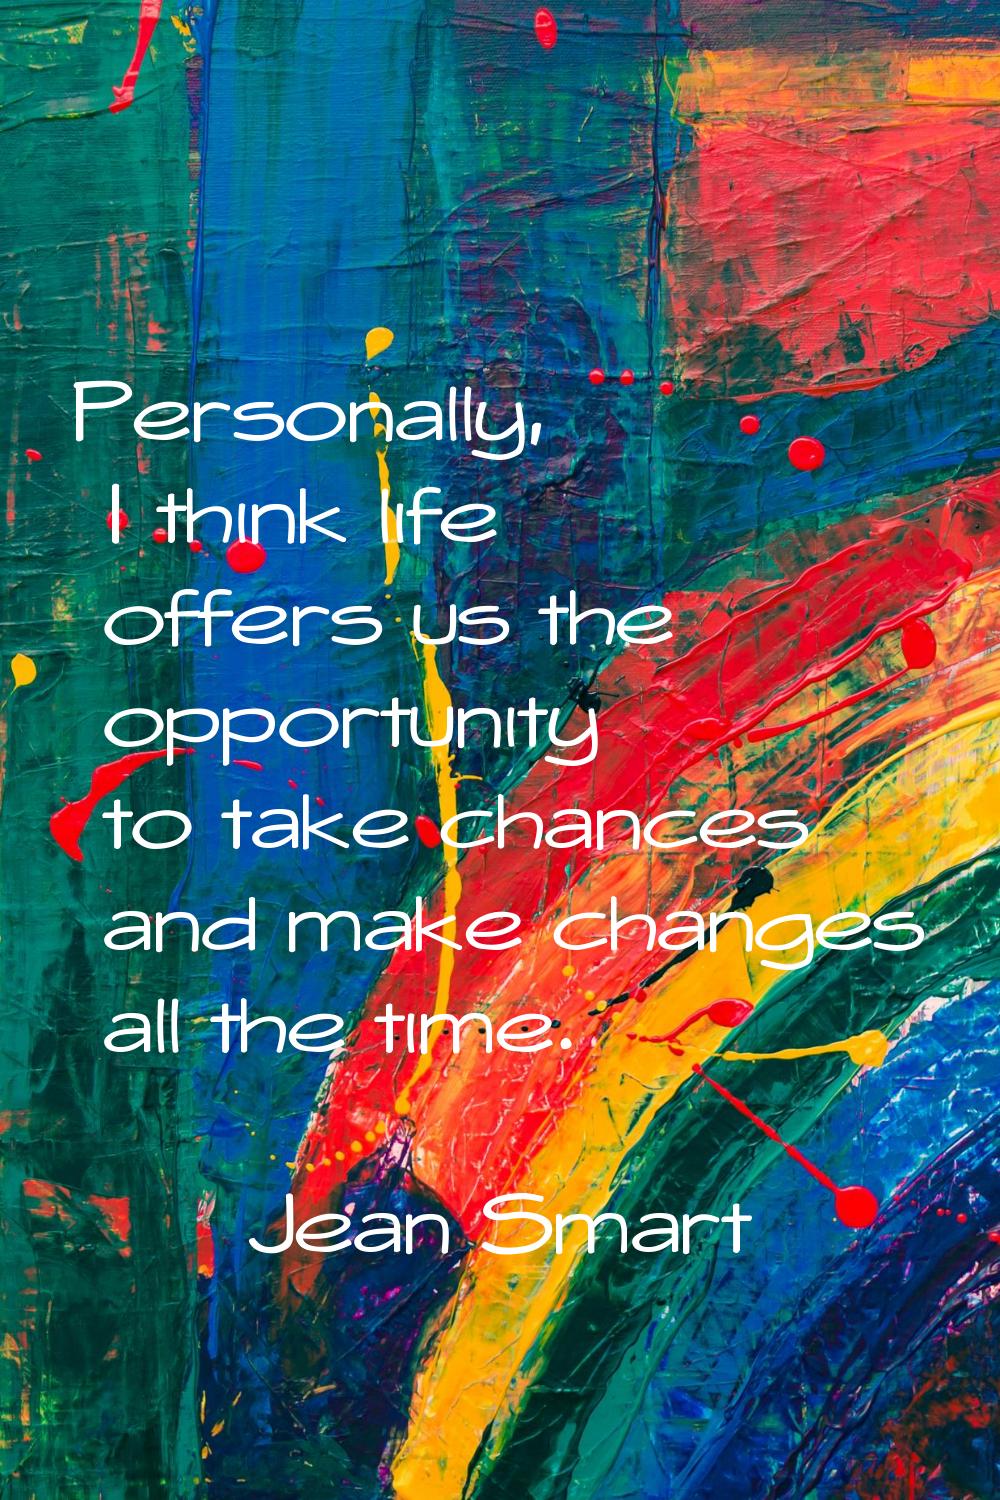 Personally, I think life offers us the opportunity to take chances and make changes all the time.